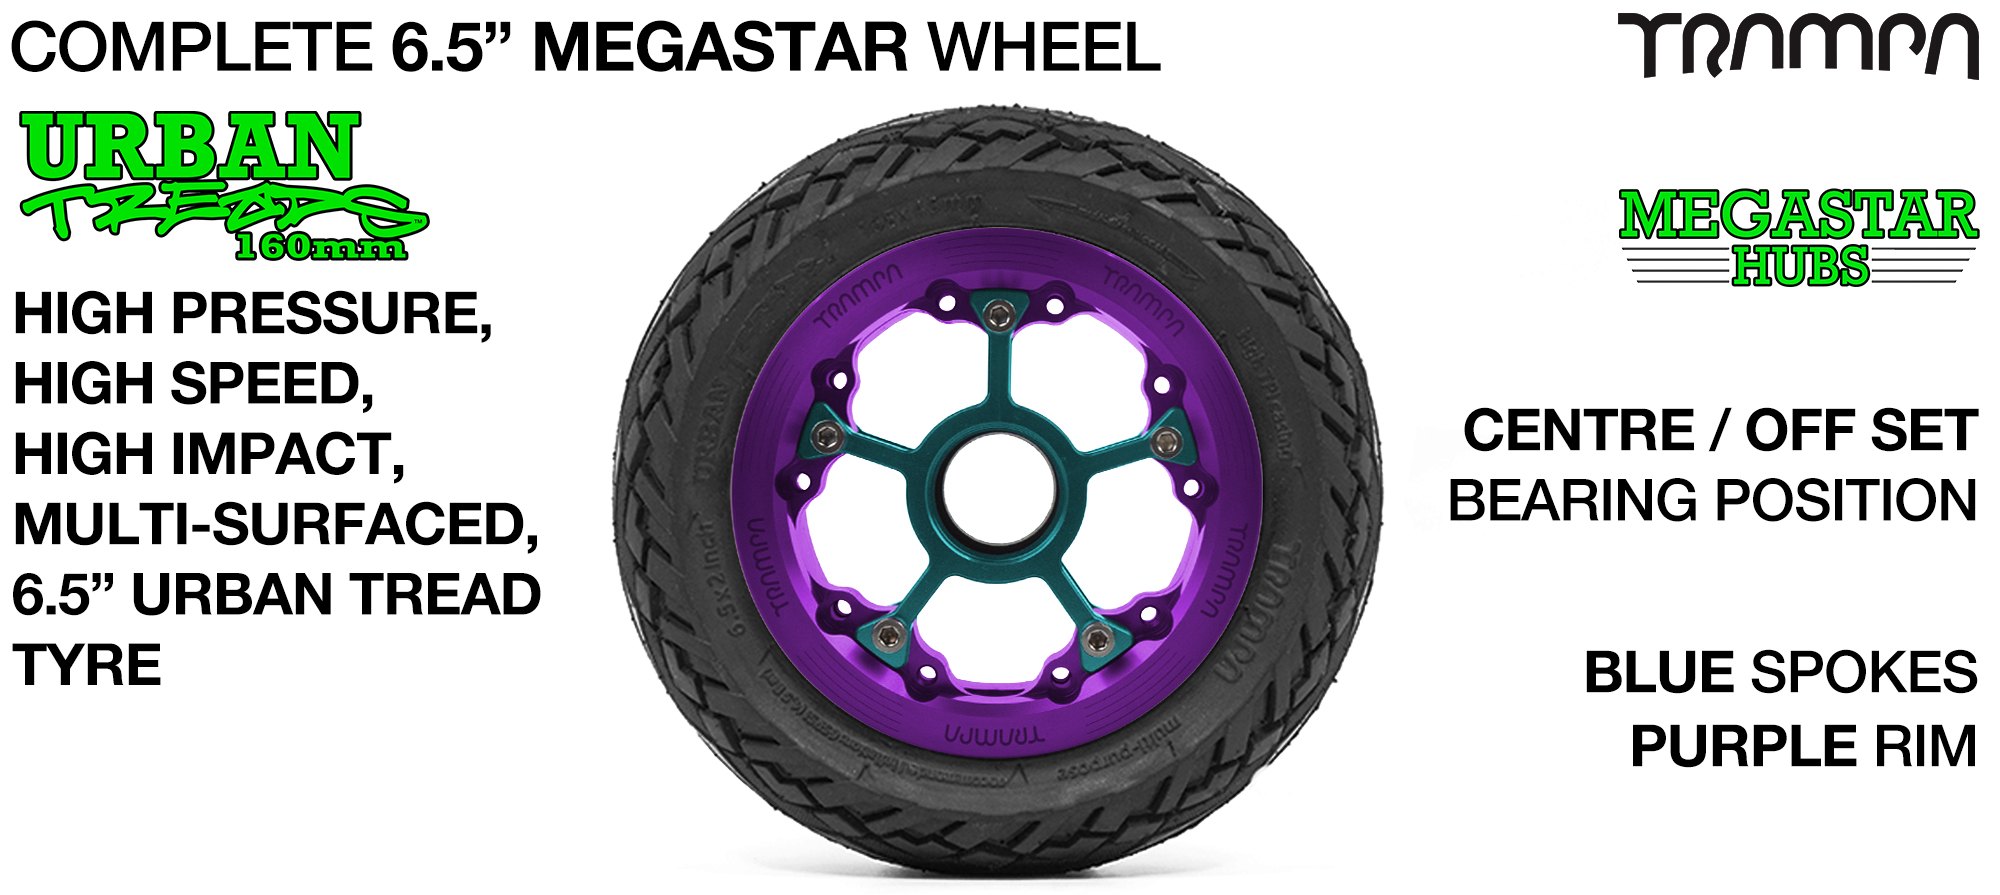 CENTER-SET MEGASTAR 8 Hub with PURPLE Rims & BLUE Spokes with the amazing Low Profile 6.5 Inch URBAN Treads Tyres